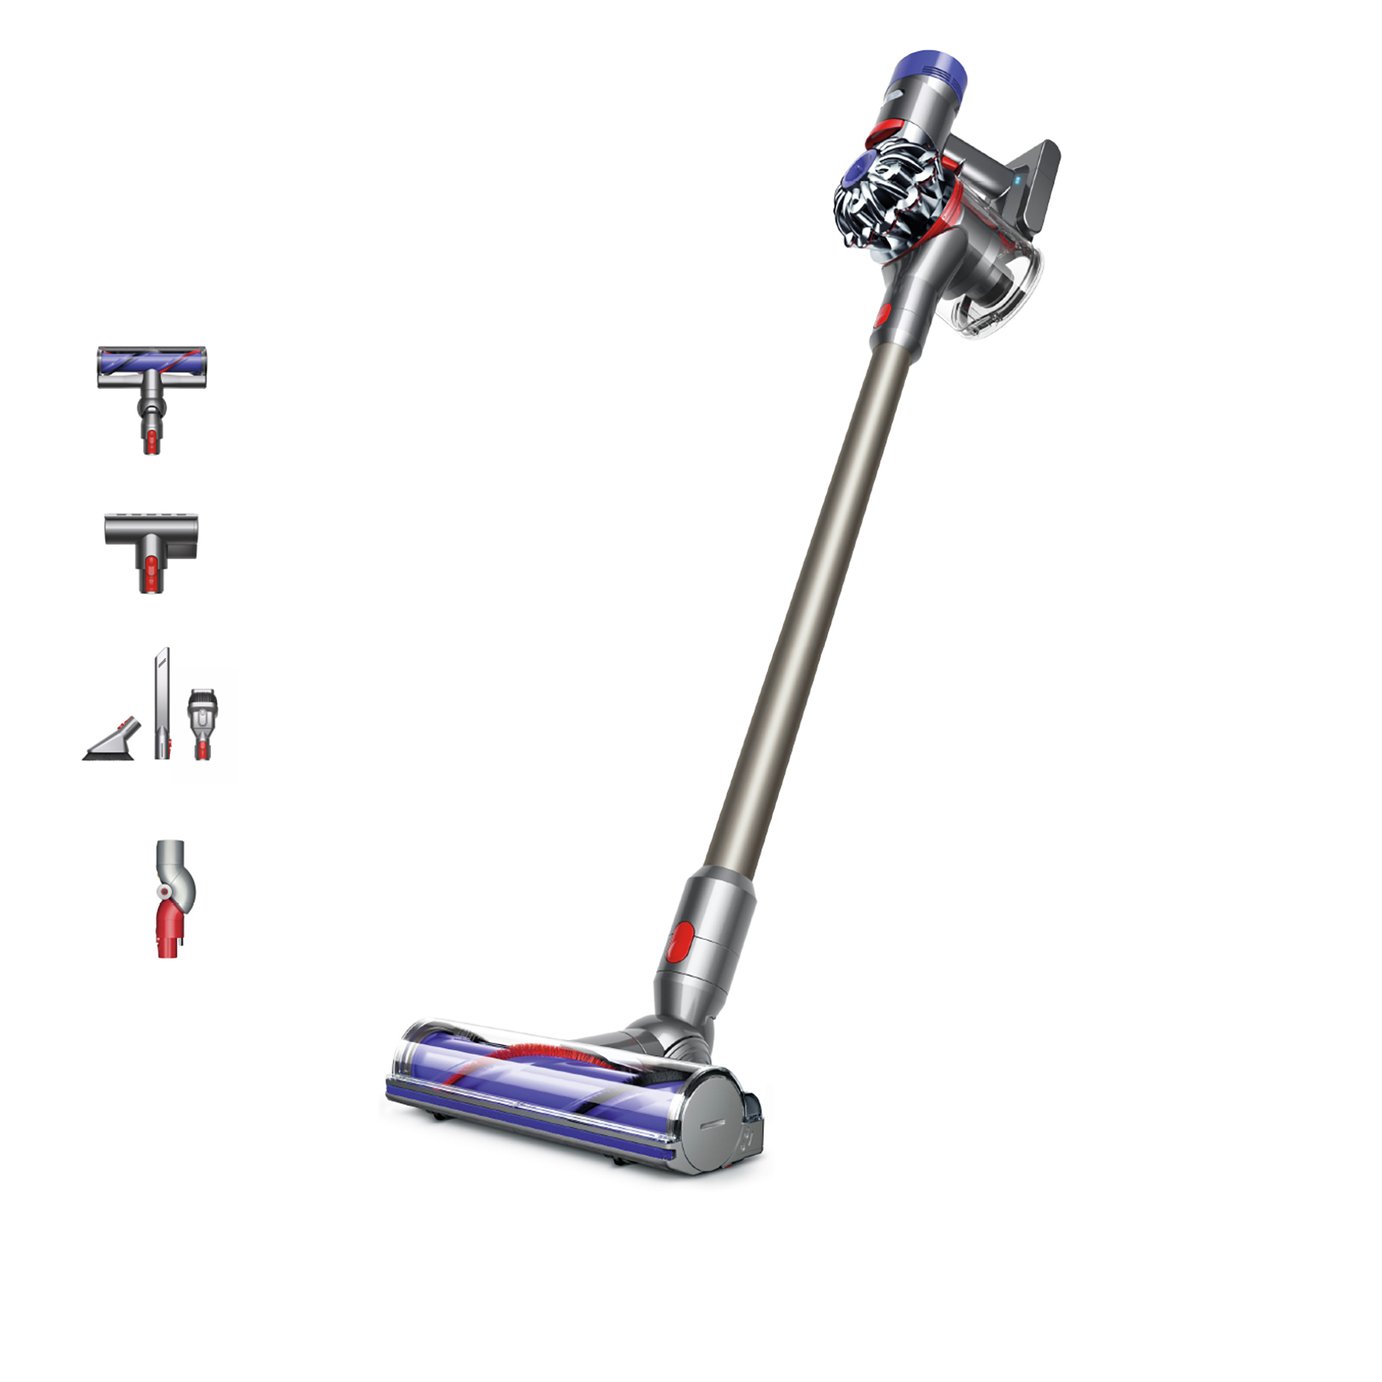 Dyson V8 Animal Cordless Vacuum Cleaner Review